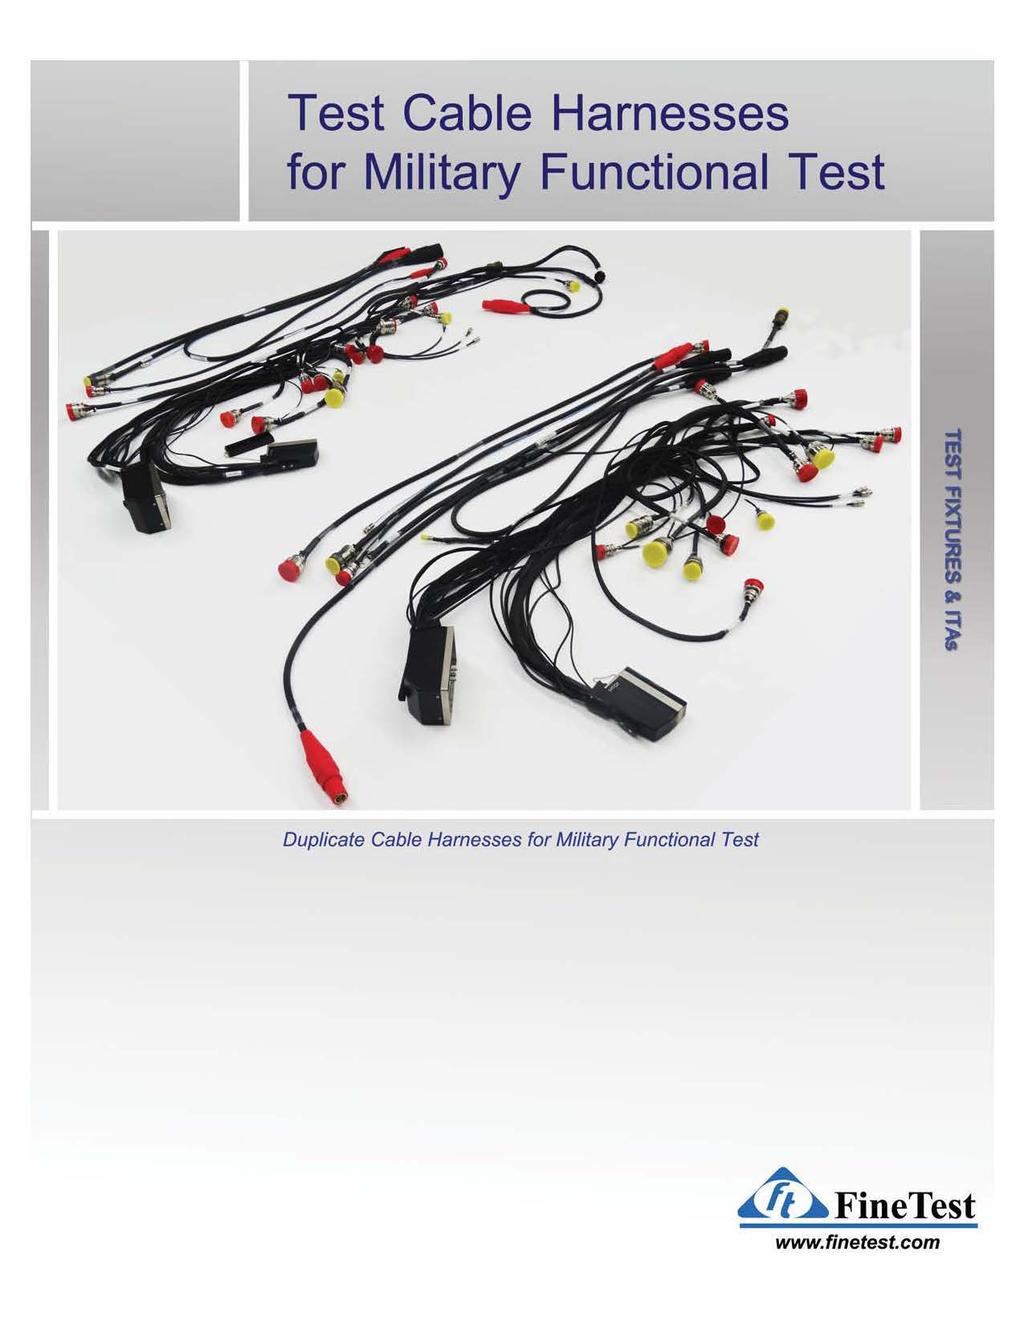 Test Cable Harnesses for Military Functional Test